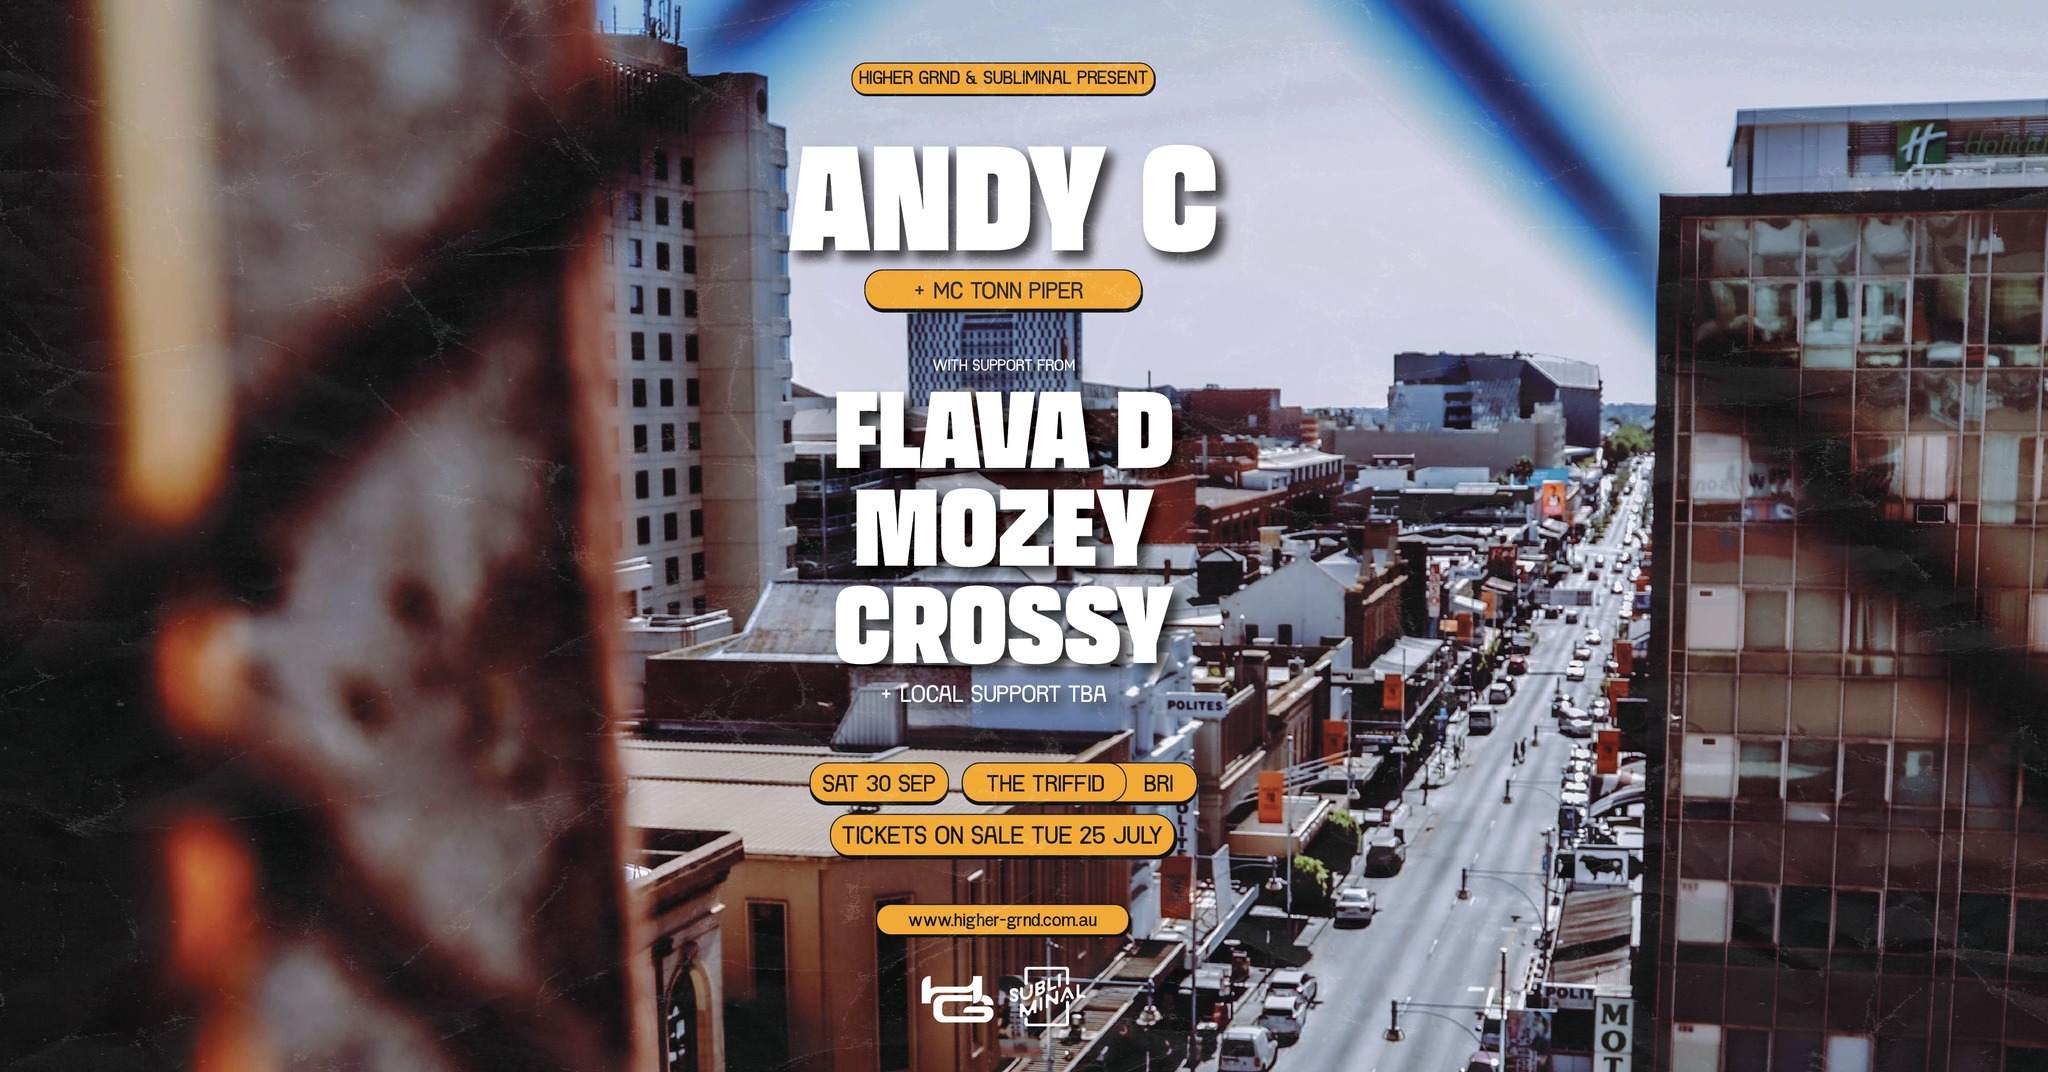 Higher Grnd + Subliminal present: Andy C, Flava D, Mozey & Crossy - フライヤー表